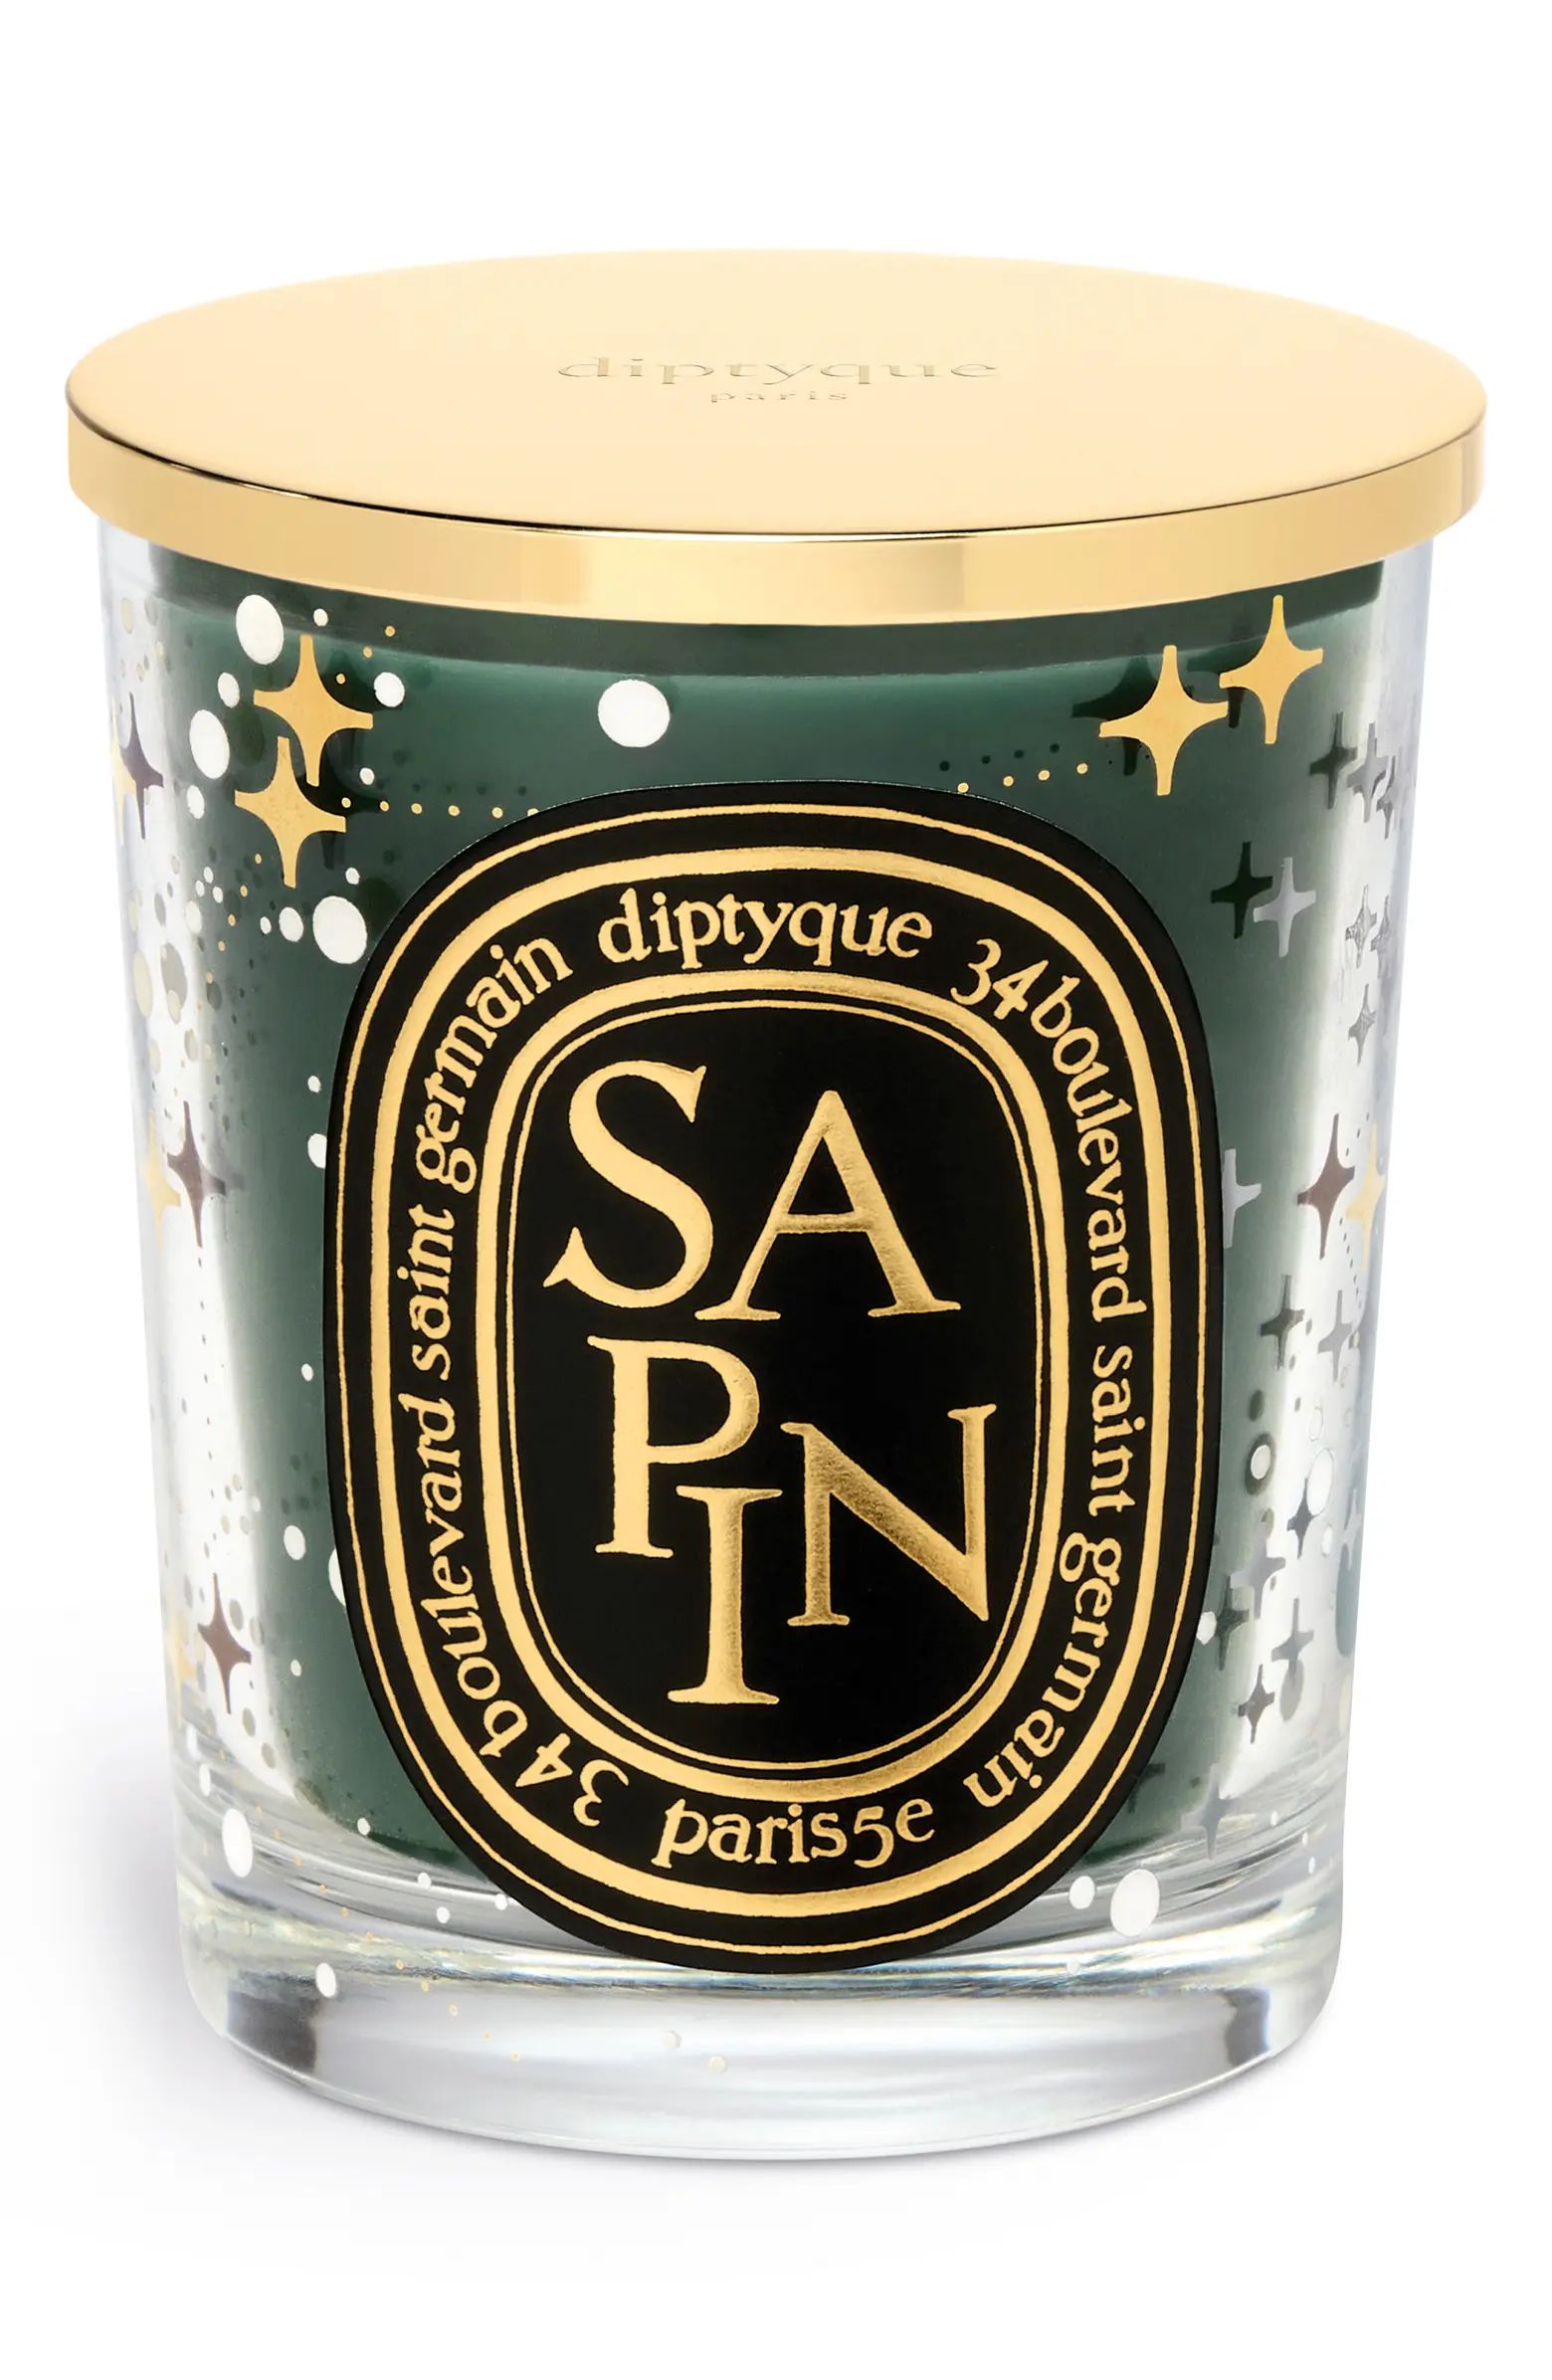 Sapin/Pine Tree Candle | Nordstrom